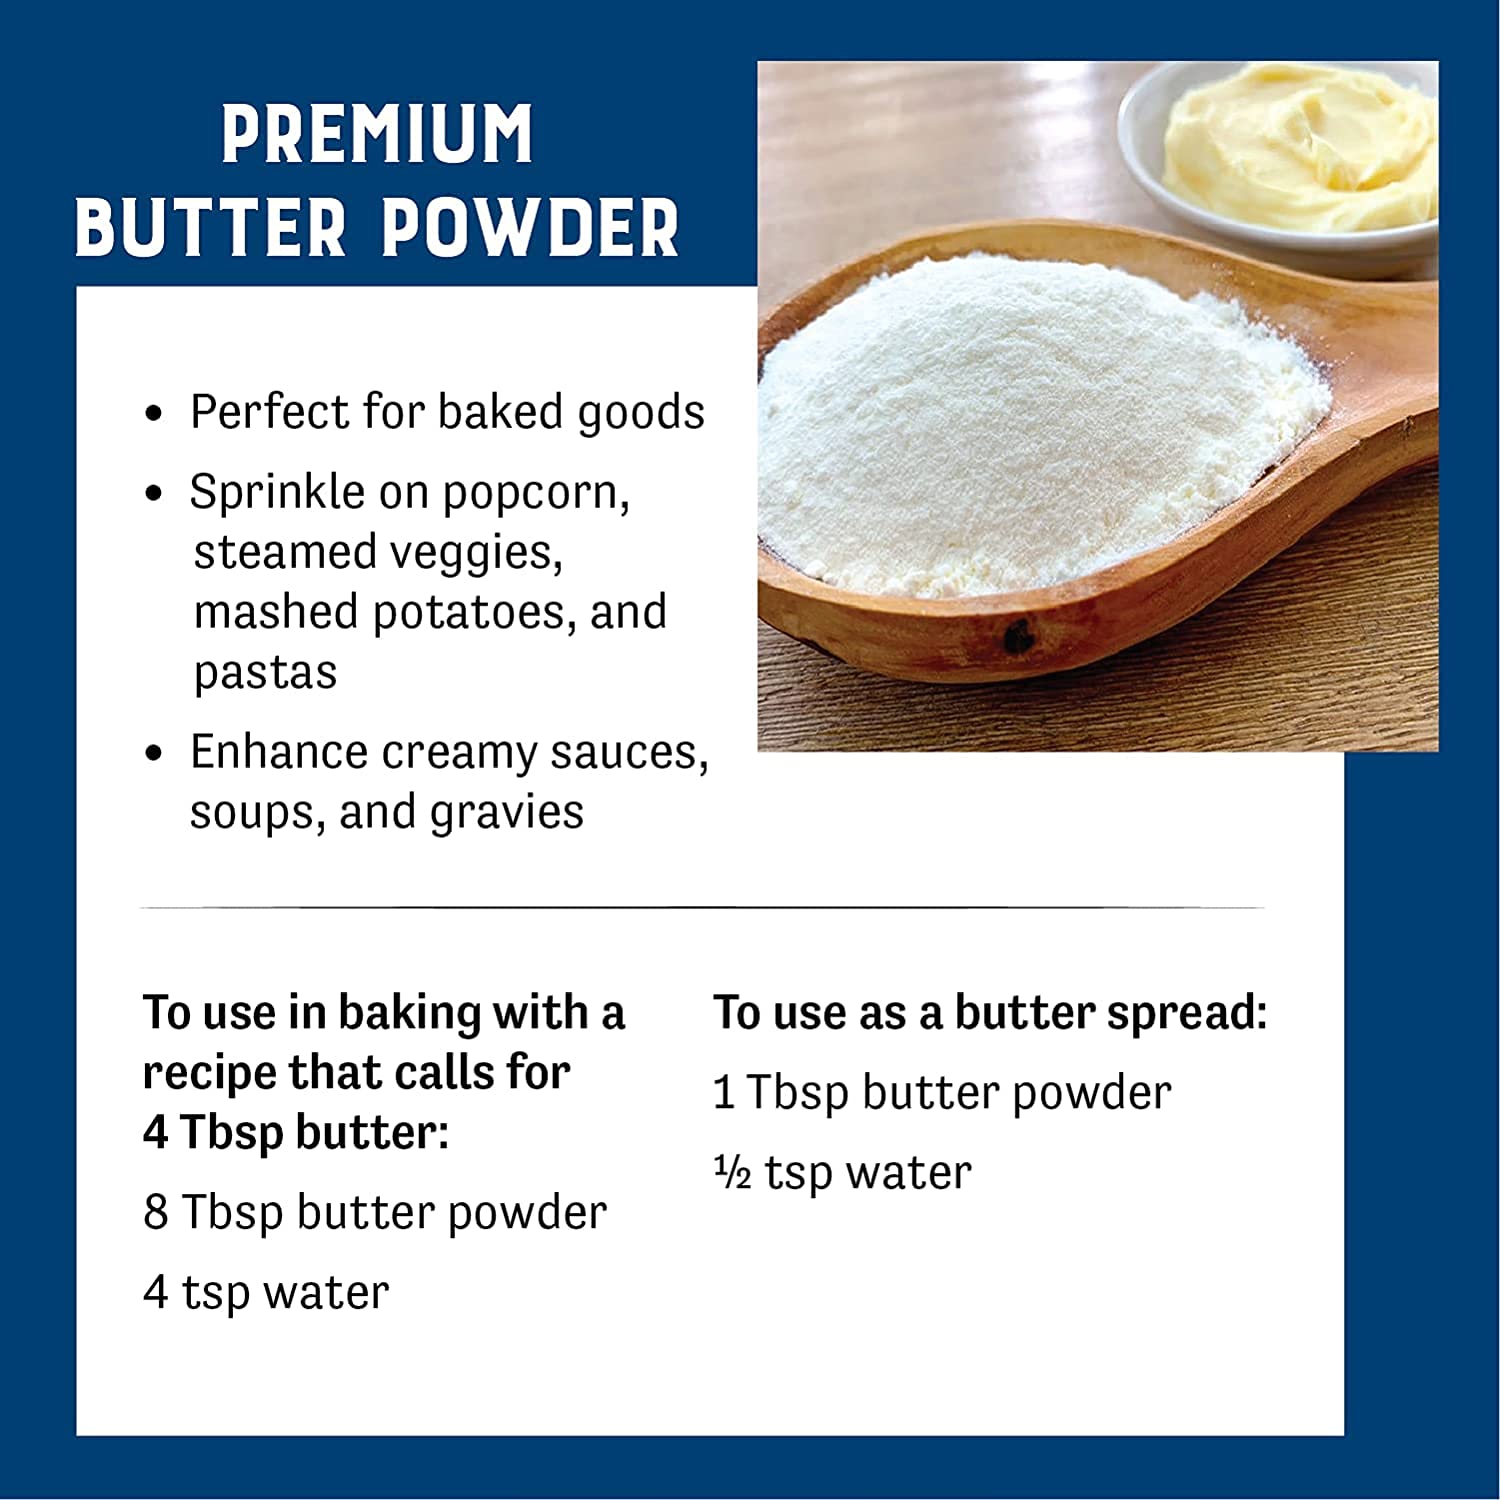 Judee’s Butter Powder 11.25 oz - 100% Non-GMO and Keto-Friendly - rBST Hormone-Free - Gluten-Free and Nut-Free - Made from 100% Real Butter - Baking Ready Ingredient - Made in USA : Grocery & Gourmet Food